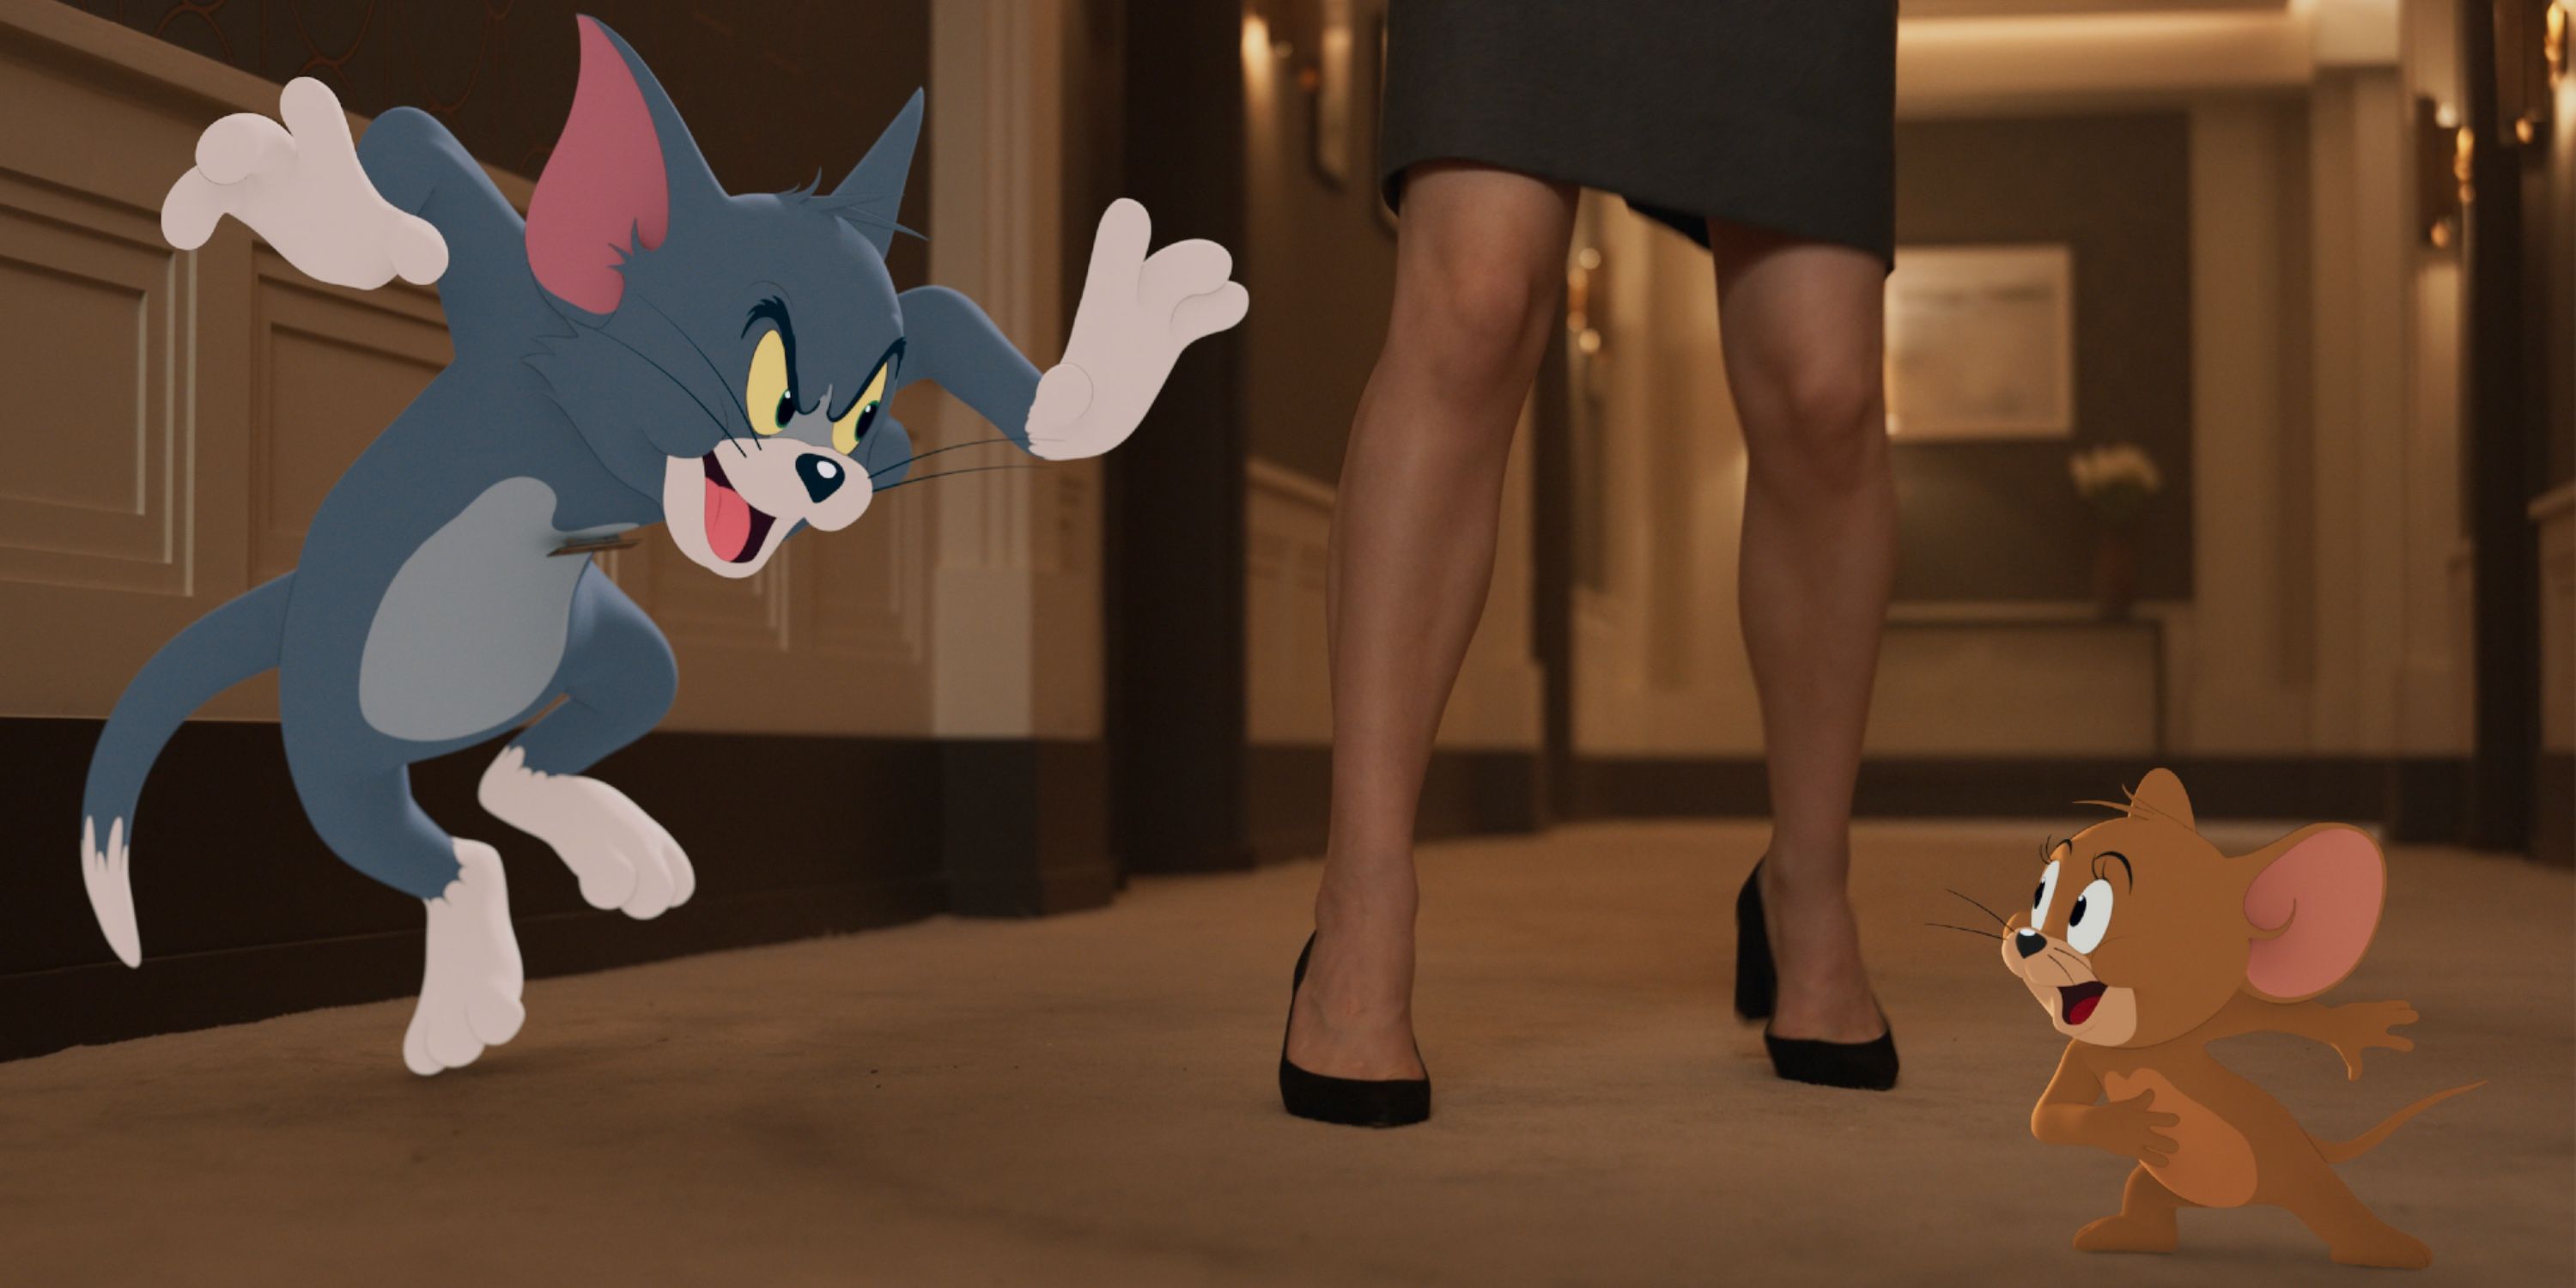 Tom &amp; Jerry chase each other in a hotel hallway